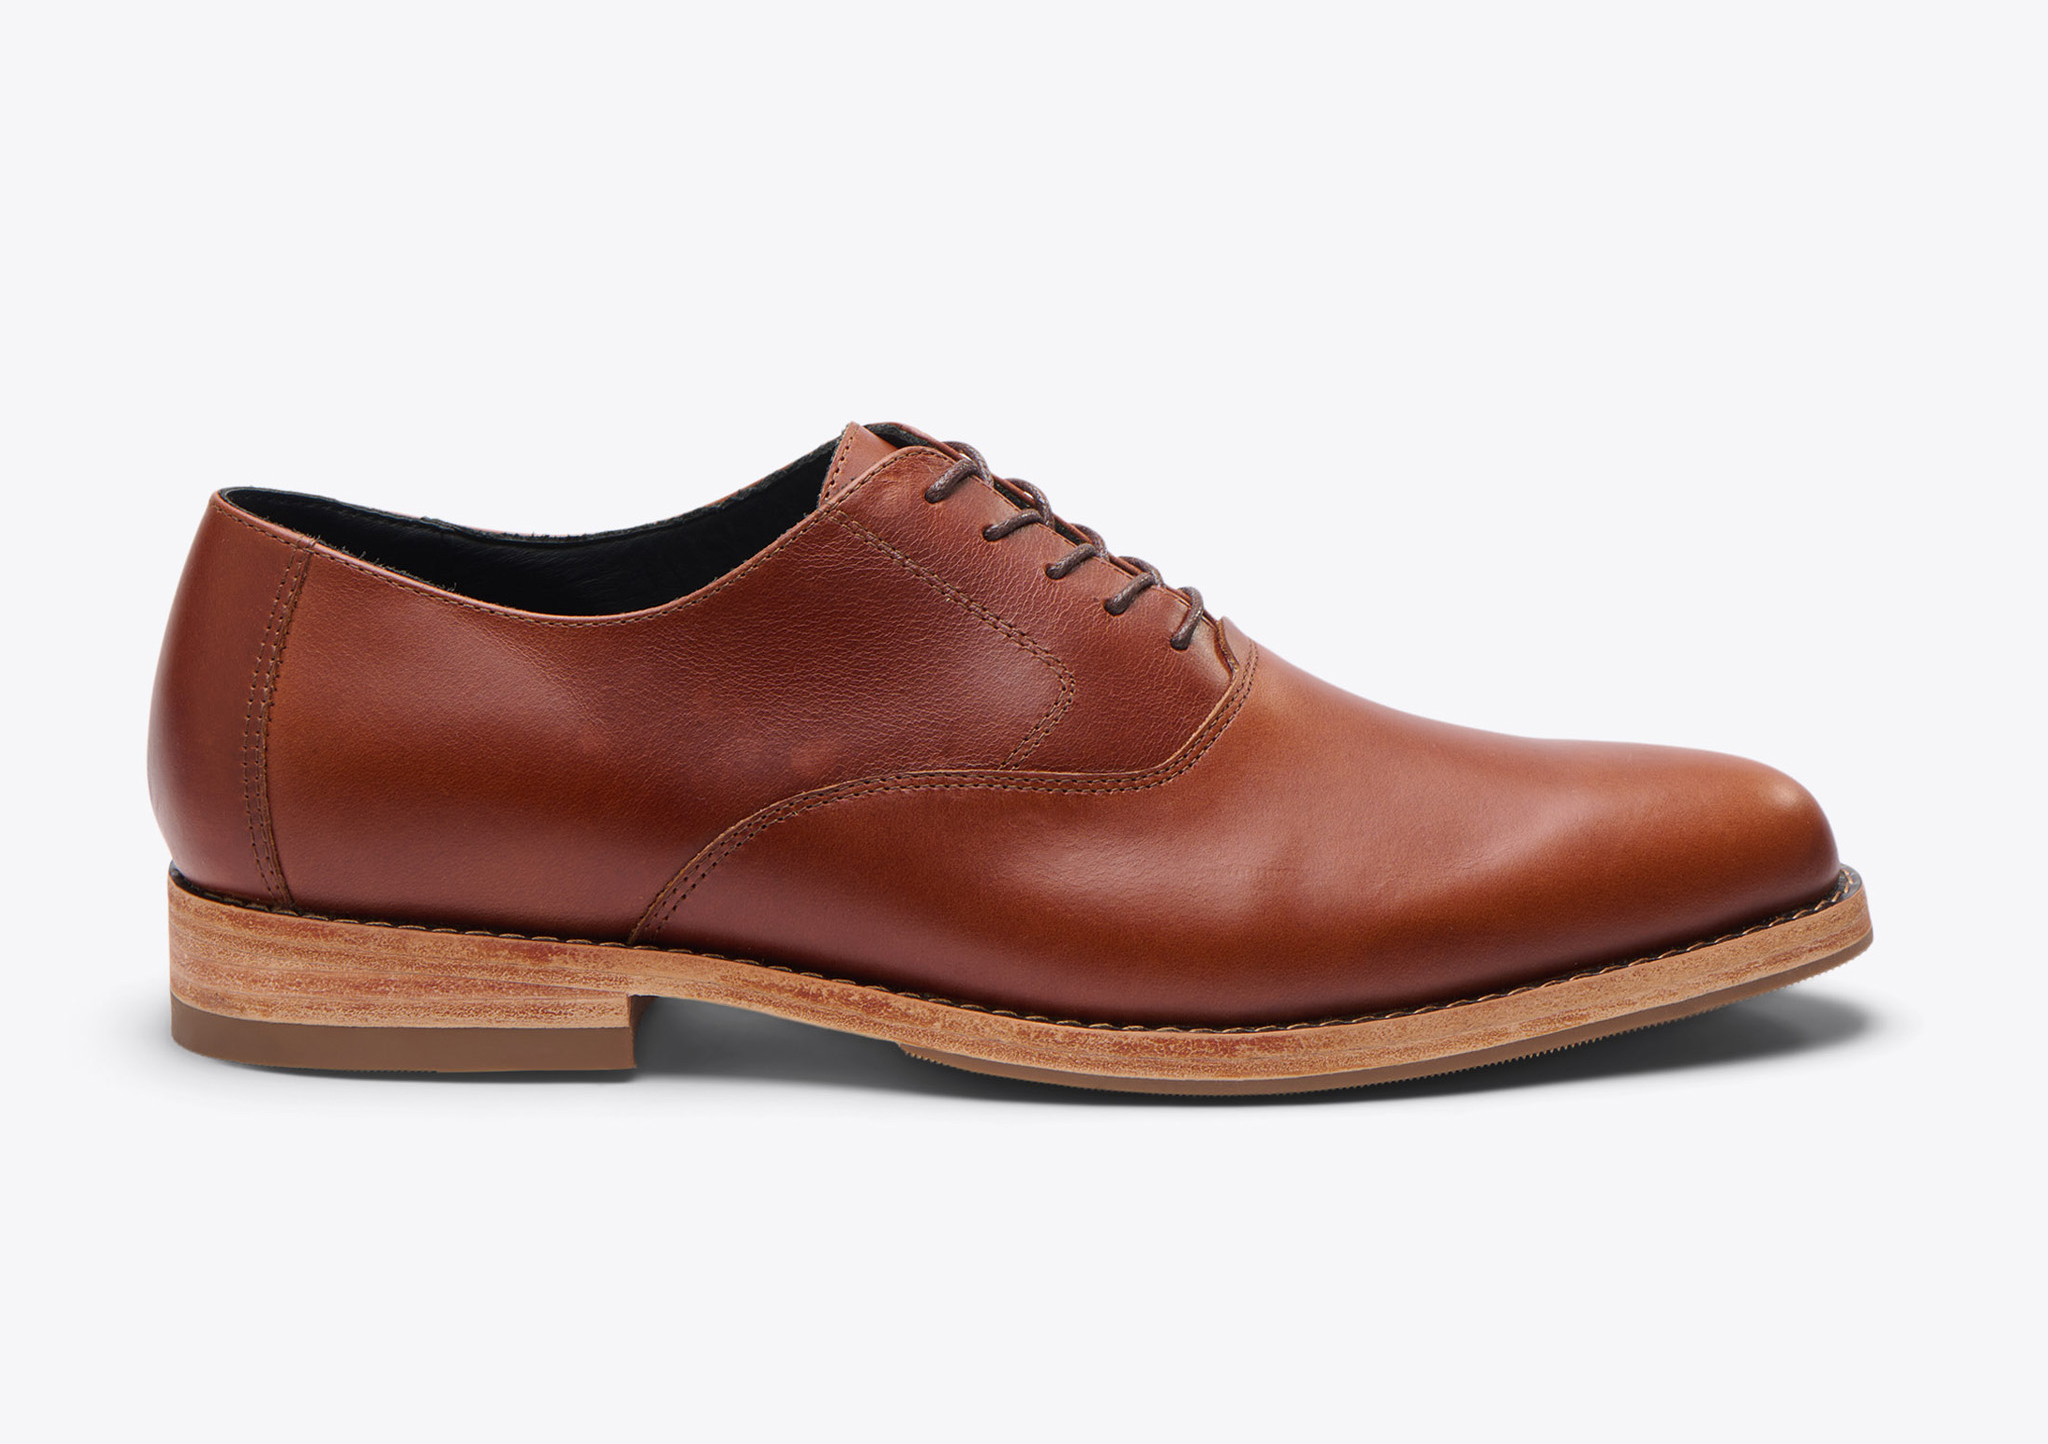 Nisolo Everyday Oxford Brandy - Every Nisolo product is built on the foundation of comfort, function, and design. 